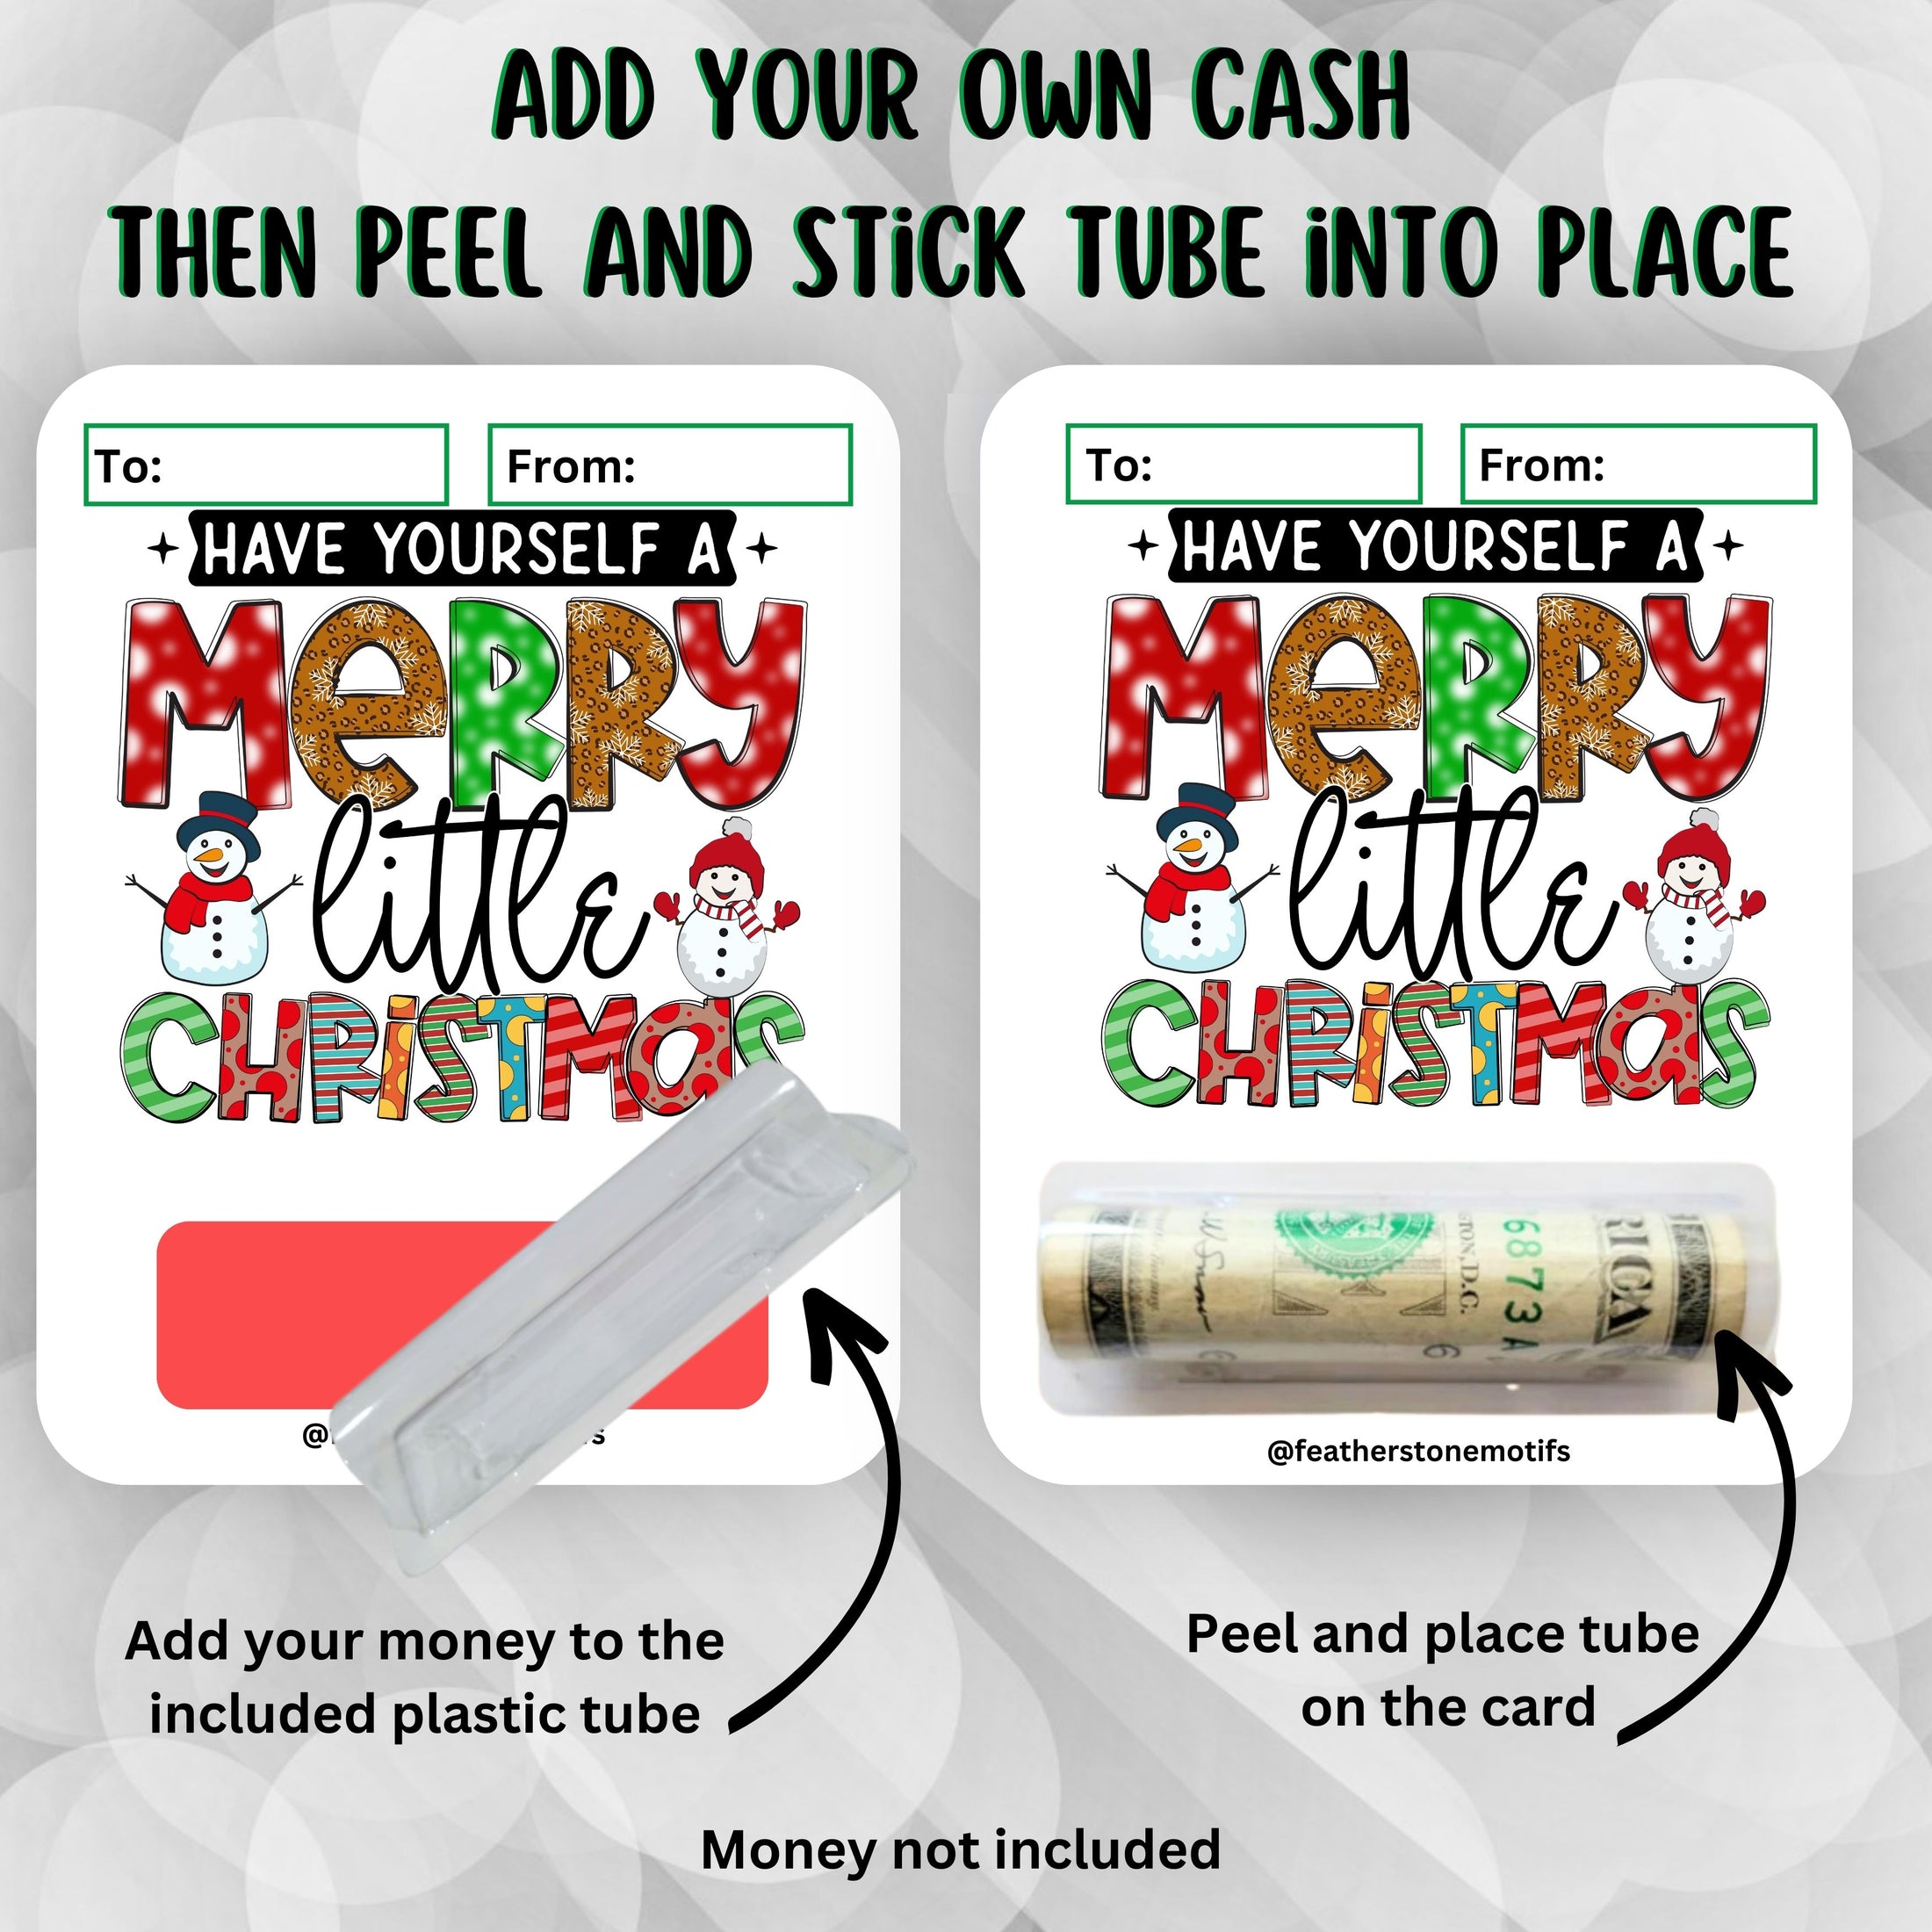 This image shows how to attach the money tube to the Merry Little Christmas Money Card.